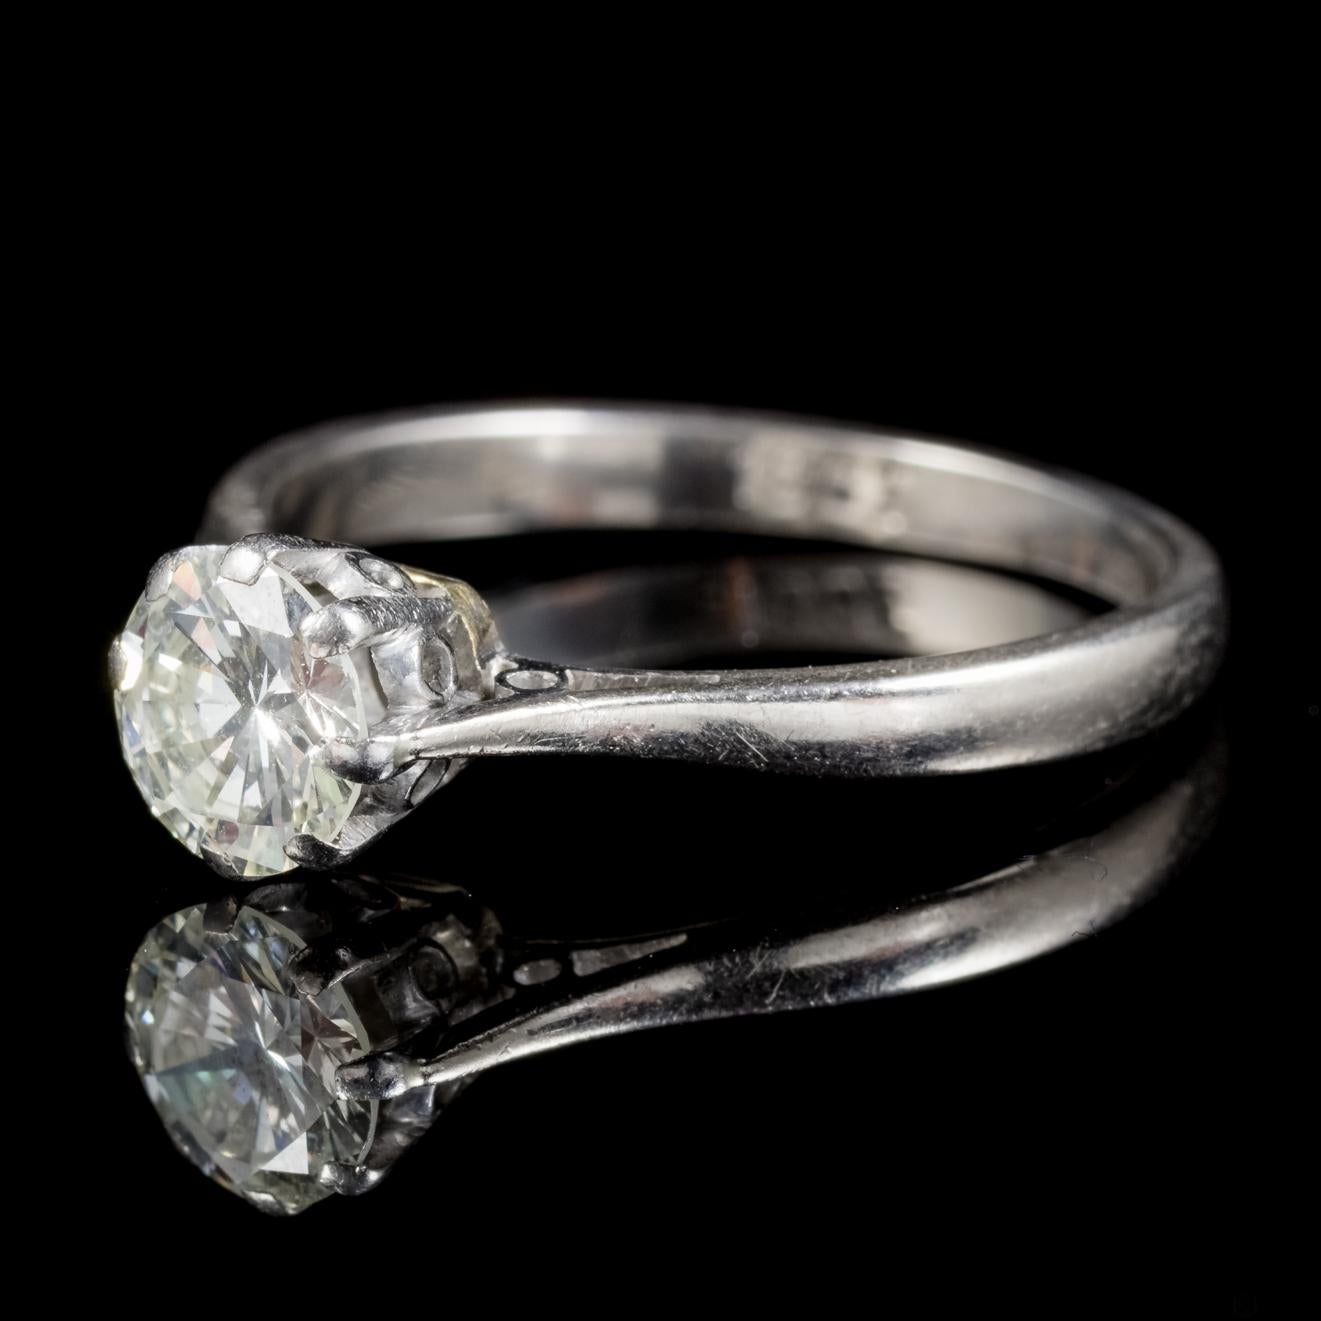 A spectacular antique Solitaire ring C. 1910, crowned with a beautiful 0.90ct Diamond which is SI 1 clarity – I colour. 

The Edwardian period was also known as the ‘Beautiful era’ and produced engagement rings that were elegant in design with